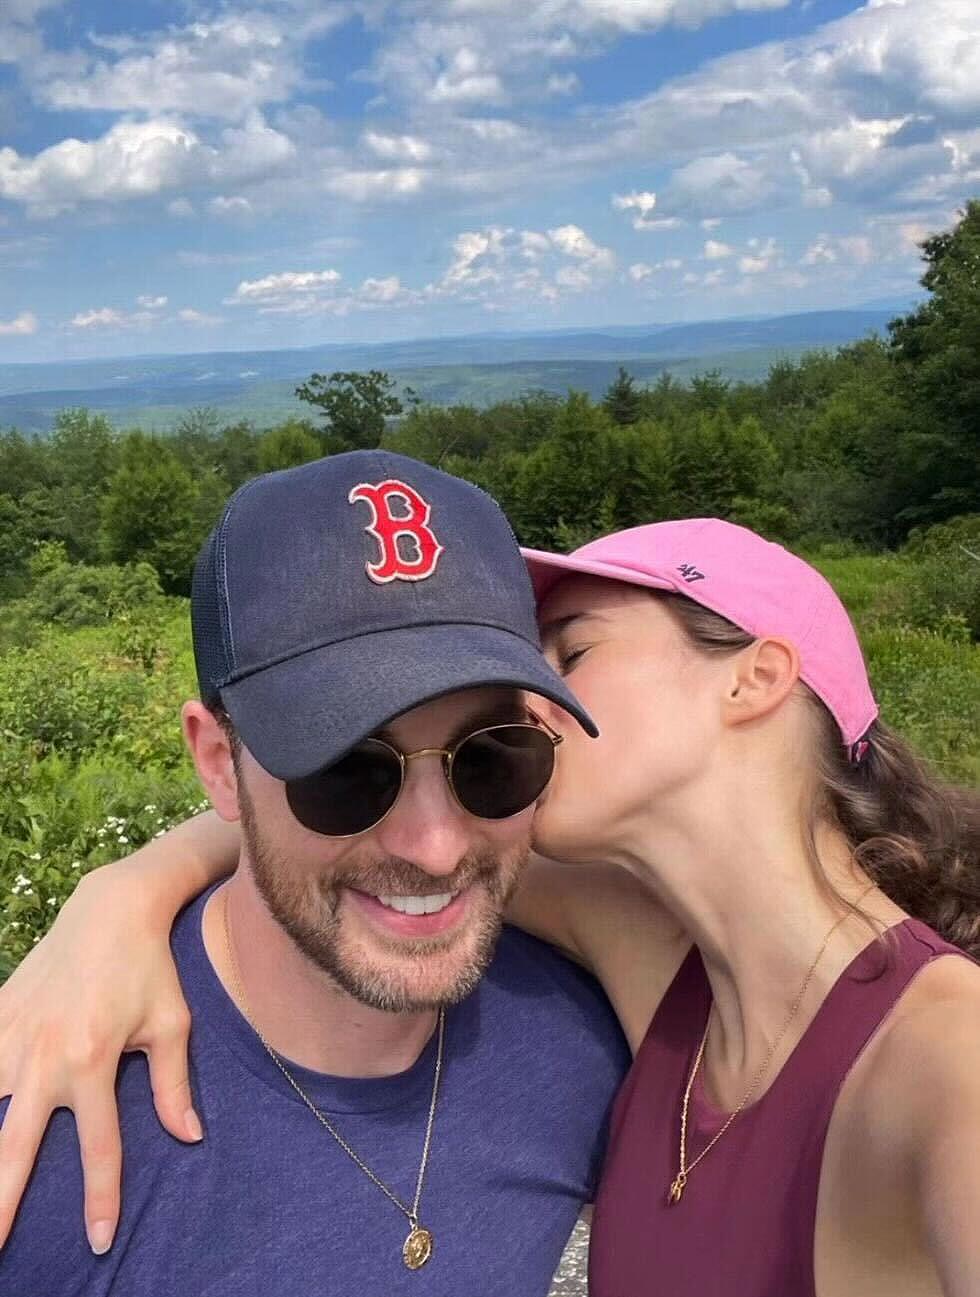 Chris Evans Confirms His Marriage to Wife Alba Baptista After Secret Wedding